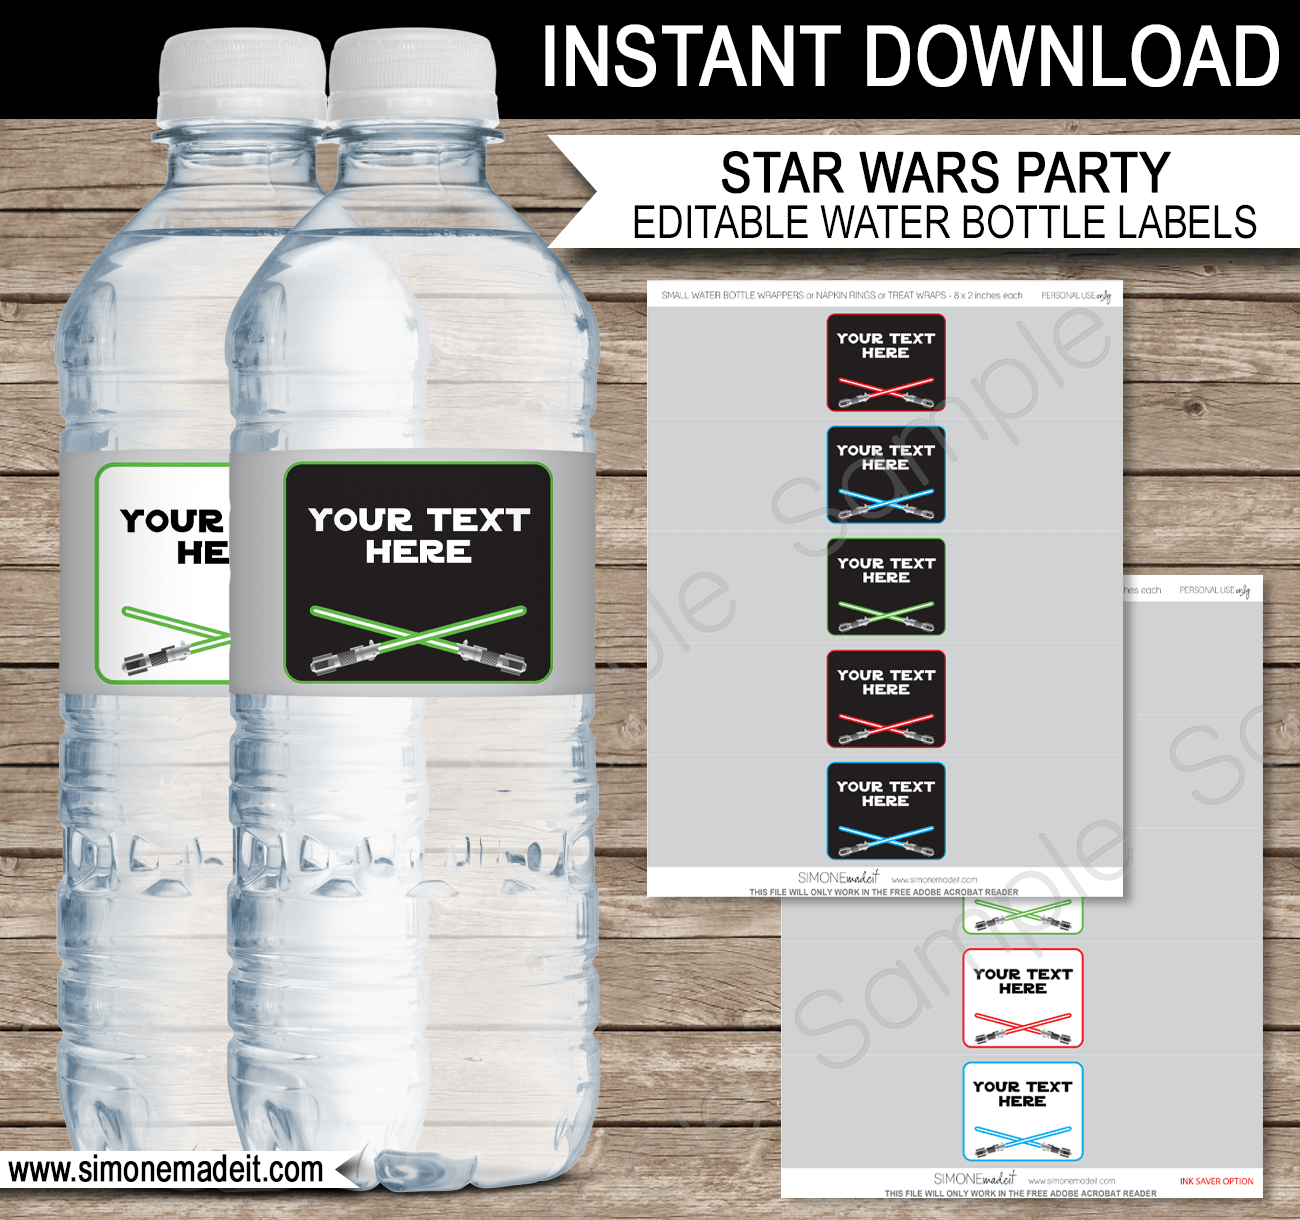 Printable Star Wars Party Water Bottle Labels Template | Birthday Party Decorations | DIY Editable Text | $3.00 INSTANT DOWNLOAD via SIMONEmadeit.com